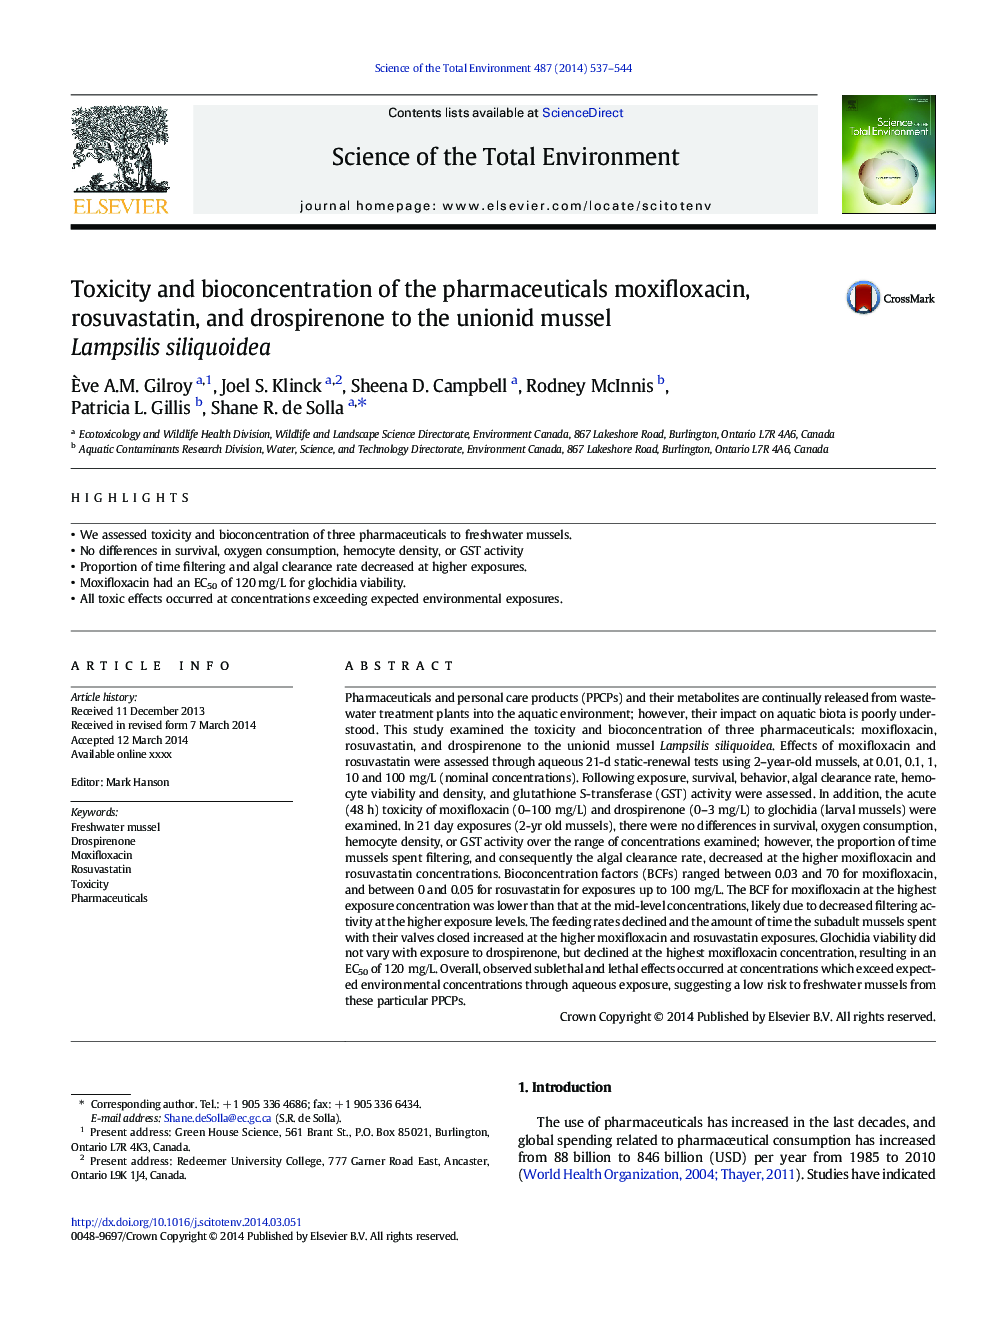 Toxicity and bioconcentration of the pharmaceuticals moxifloxacin, rosuvastatin, and drospirenone to the unionid mussel Lampsilis siliquoidea